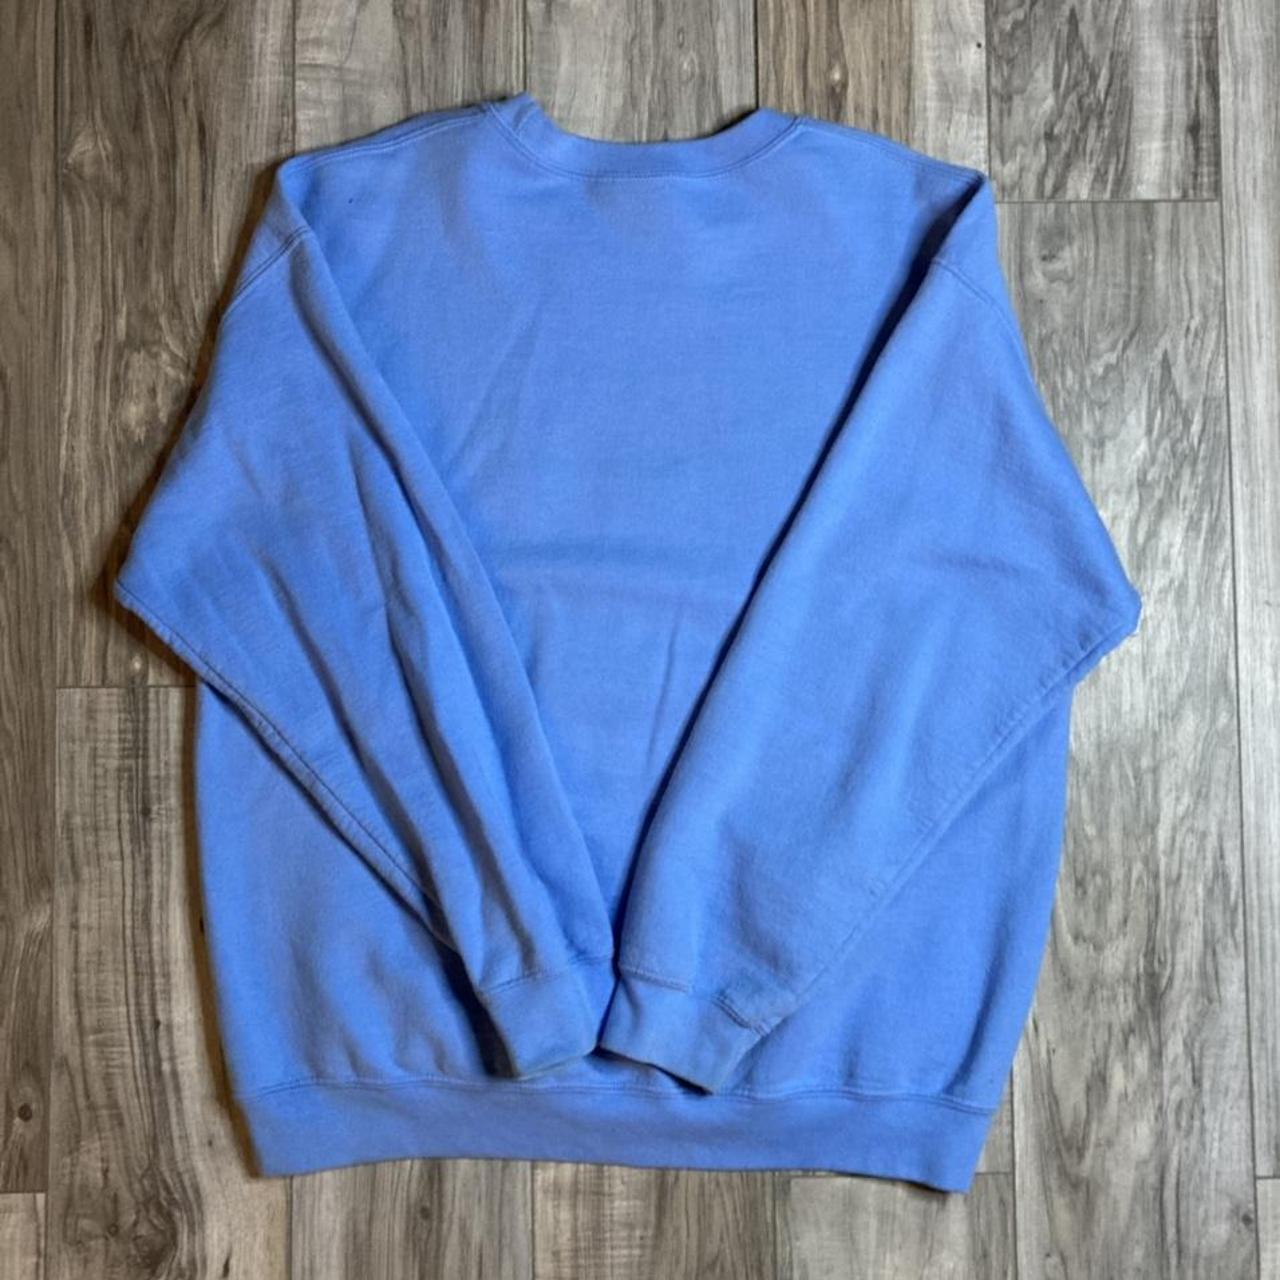 Essential Baby Blue Sweater Minor flaw as shown... - Depop